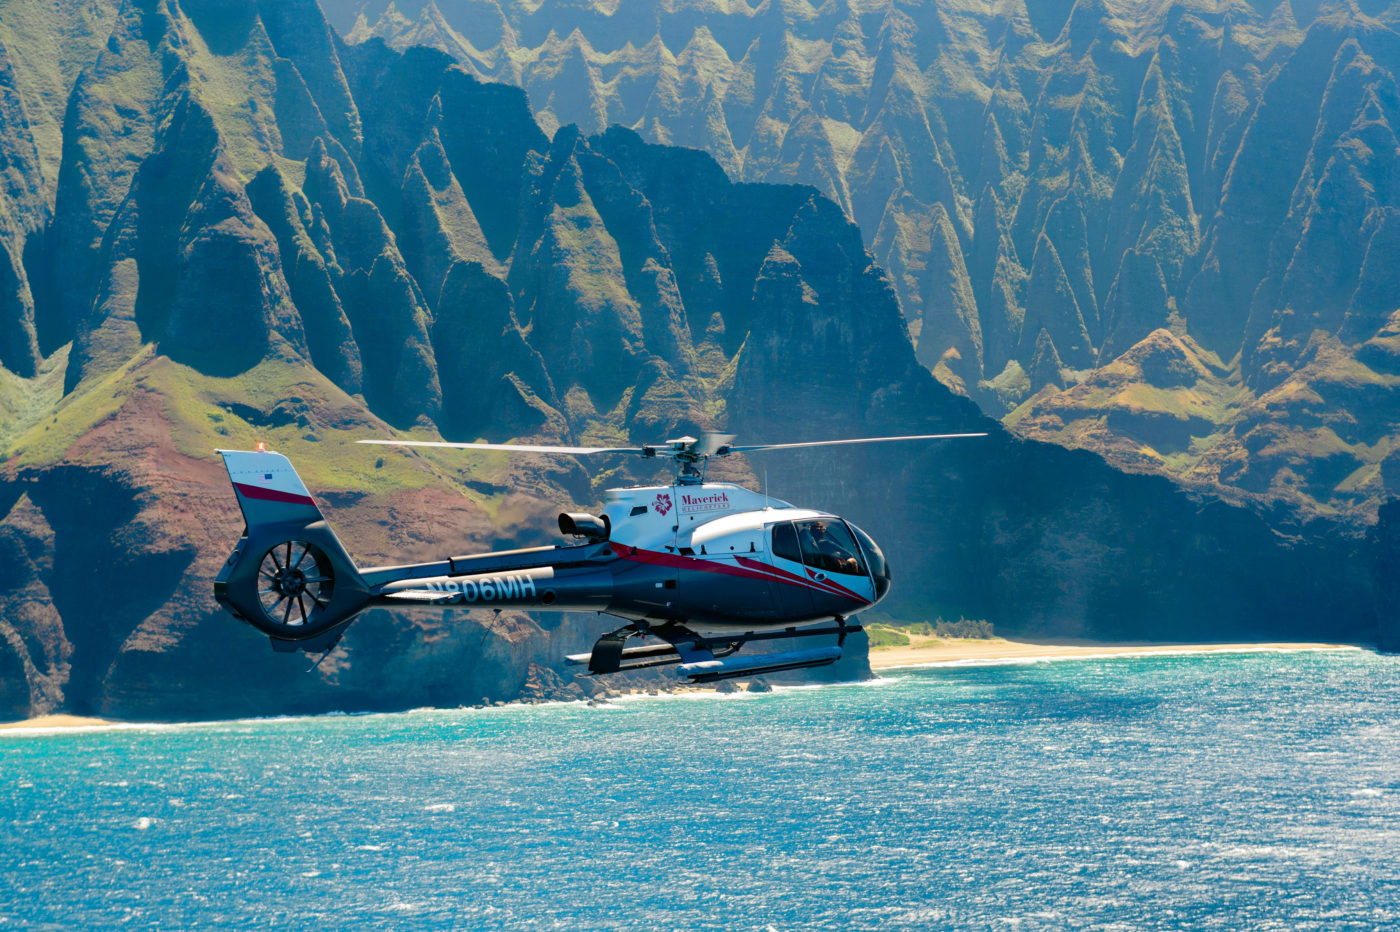 For each of Maverick Helicopters’ excursions, passengers will fly in the Airbus EC130 ECO-Star aircraft. Maverick Helicopters Photo